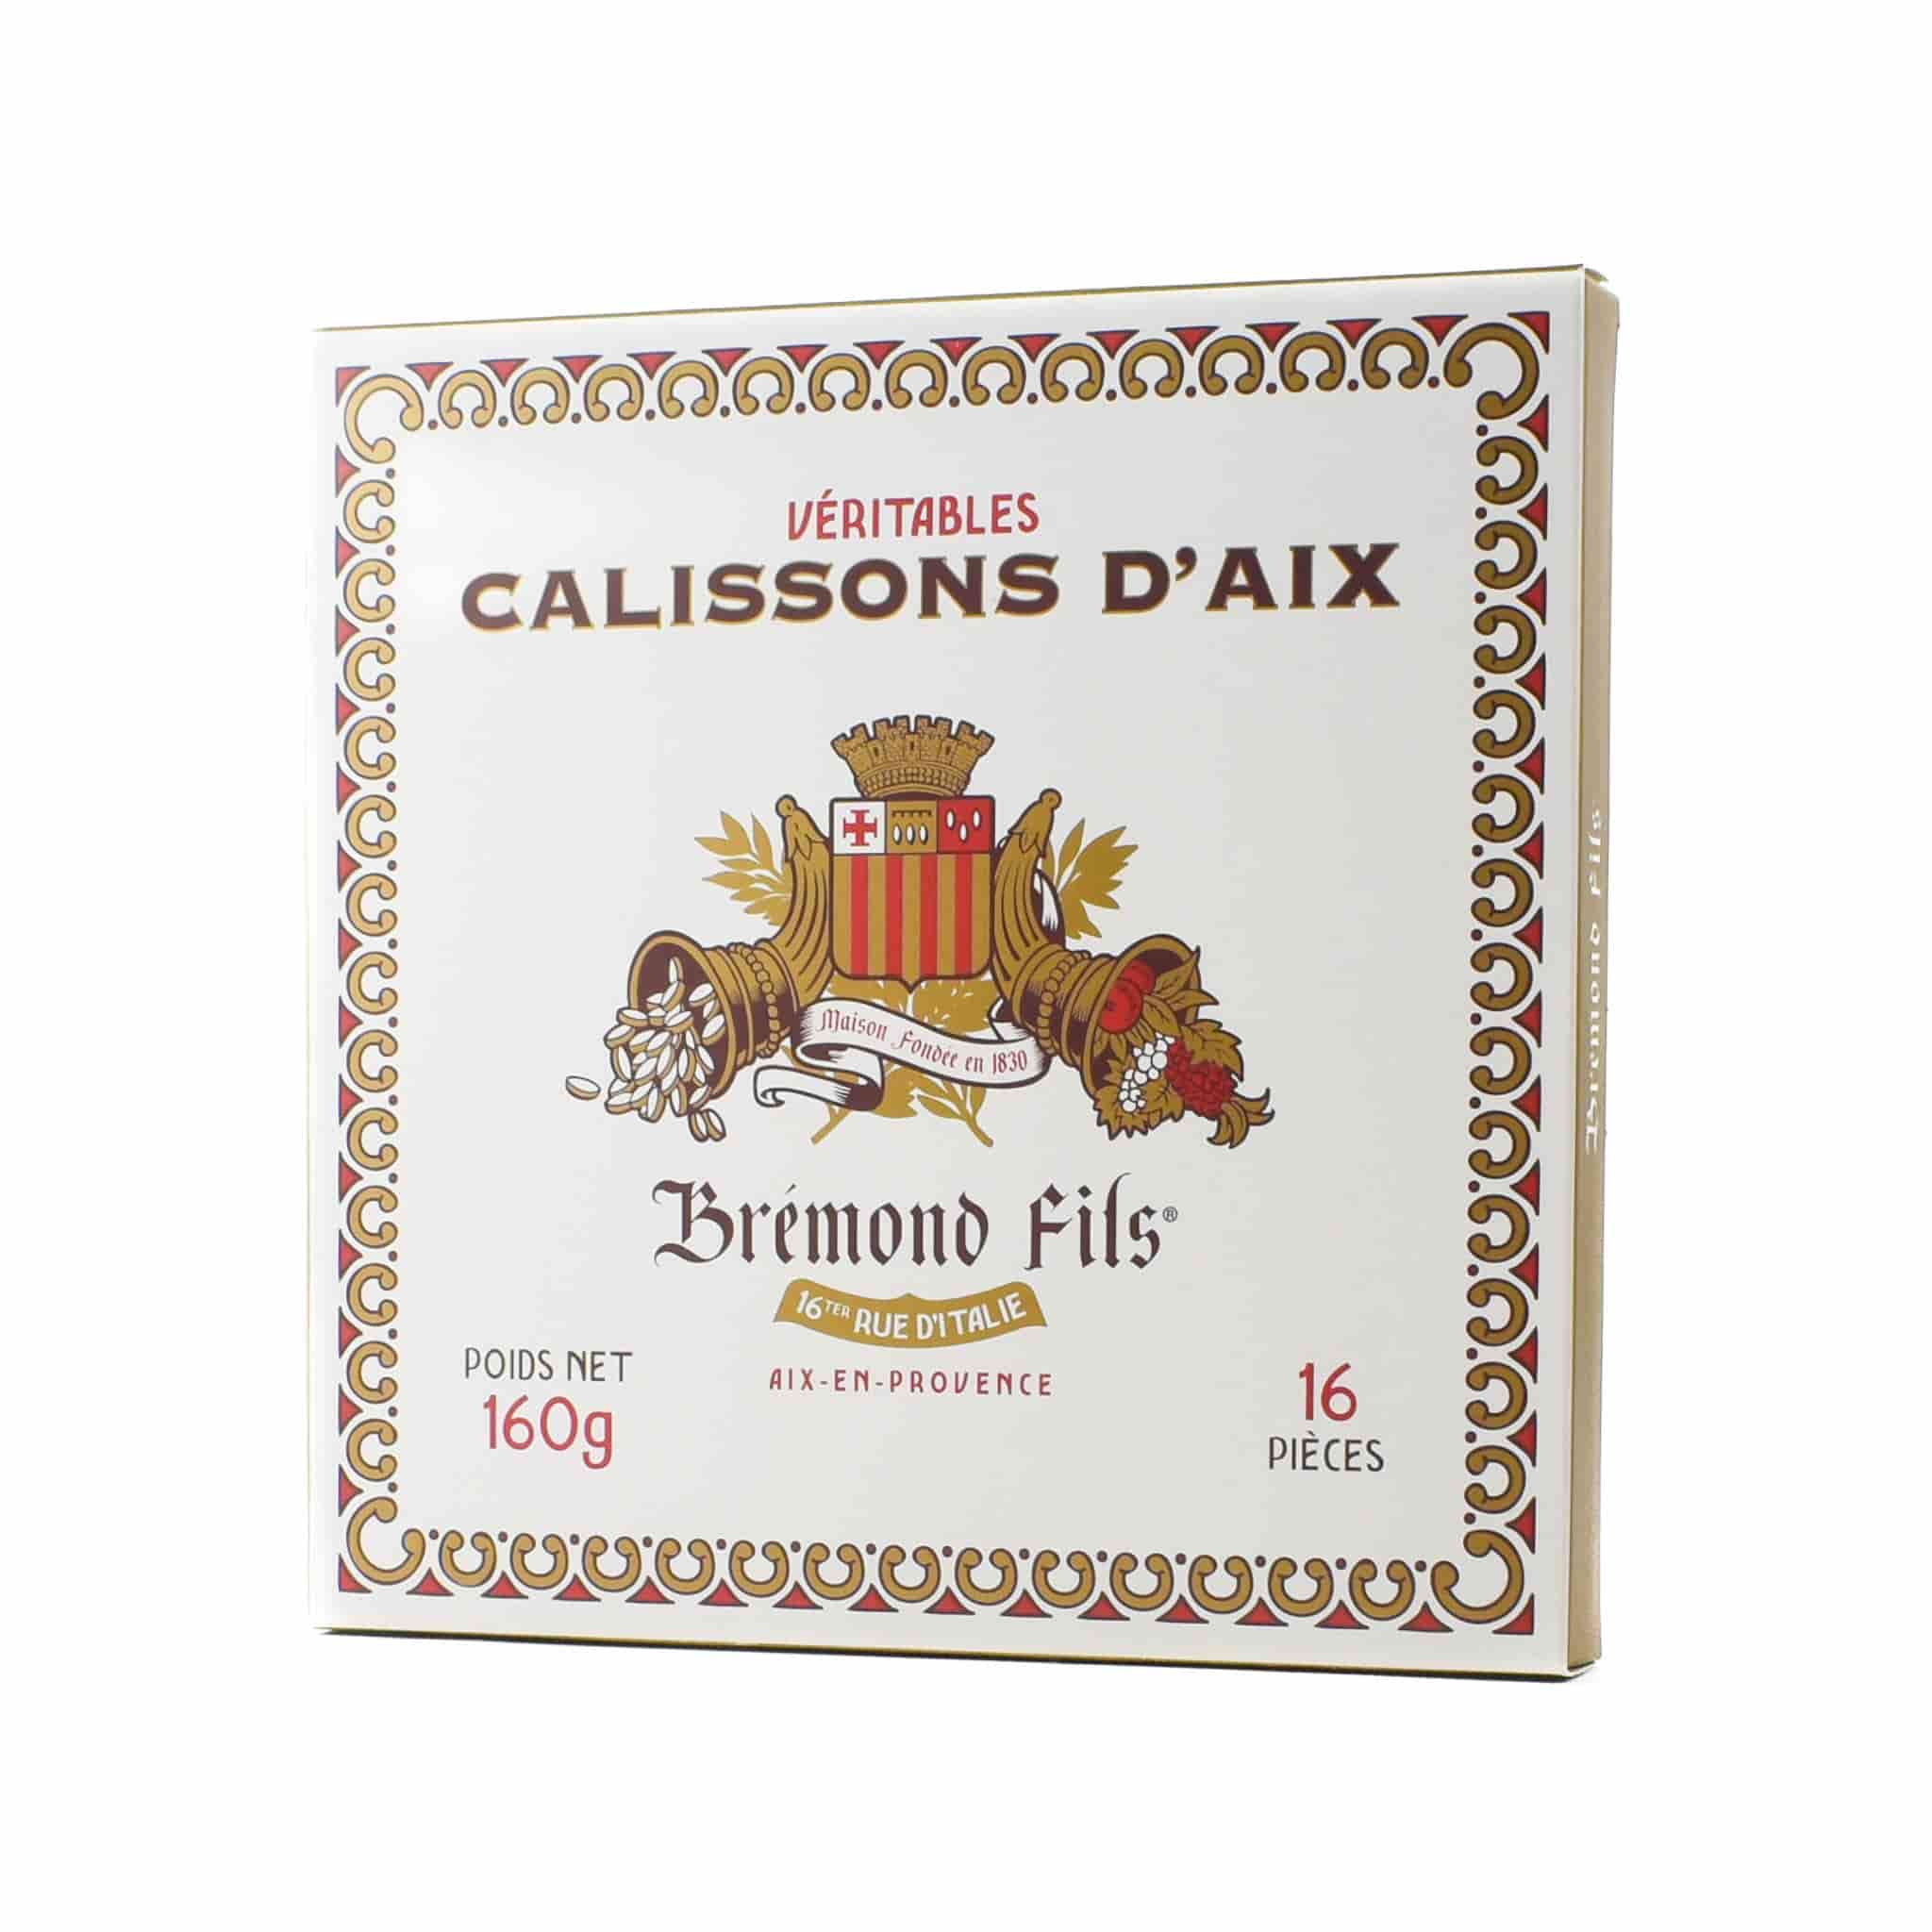 The recipe for the traditional calissons of Aix